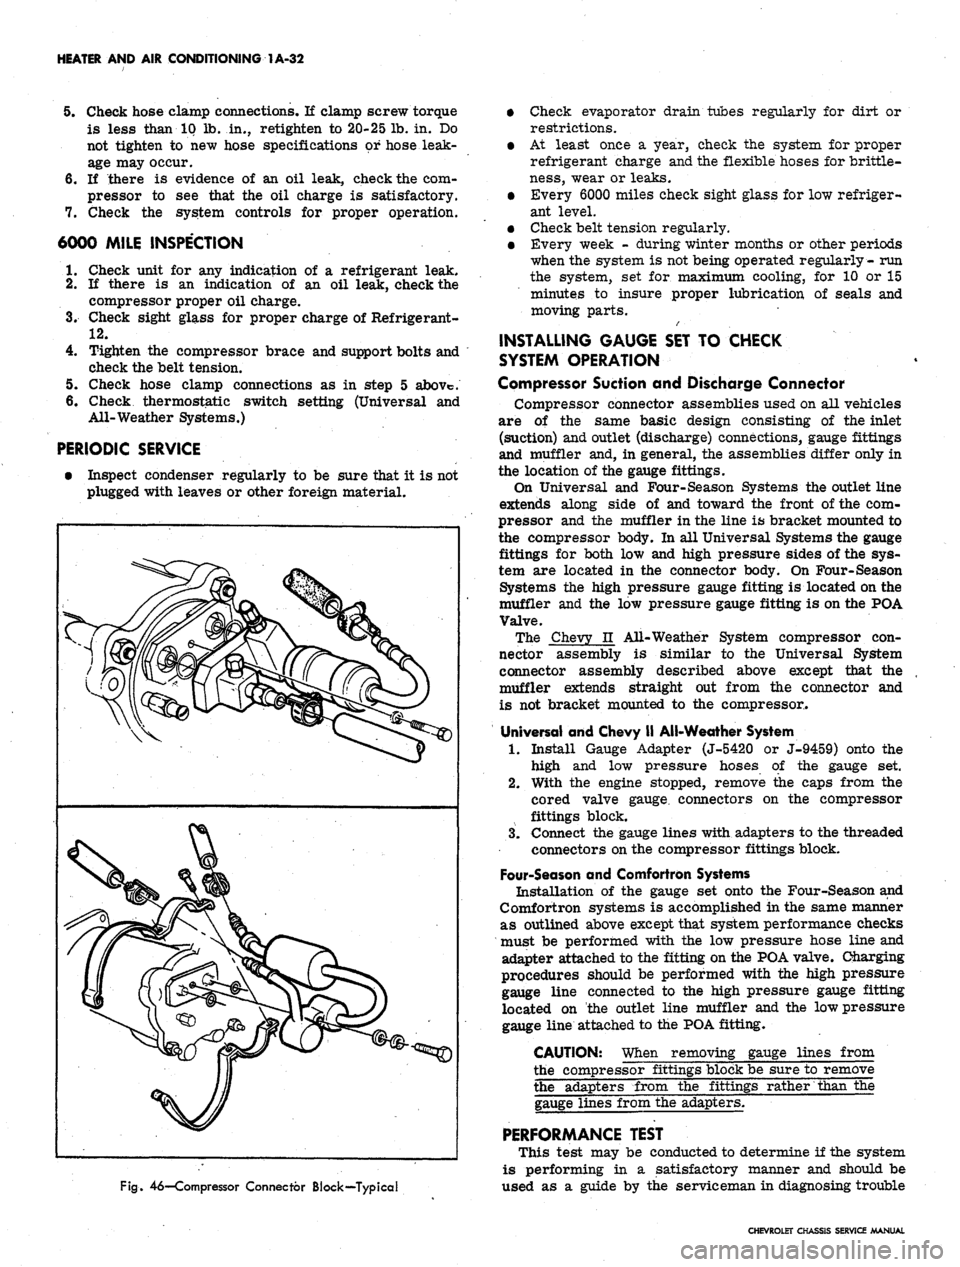 CHEVROLET CAMARO 1967 1.G Chassis Owners Manual 
HEATER AND AIR CONDITIONING 1A-32

5.
 Check hose clamp connections. If clamp screw torque

is less than 10 lb. in., retighten to 20-25 lb. in. Do

not tighten to new hose specifications or hose leak